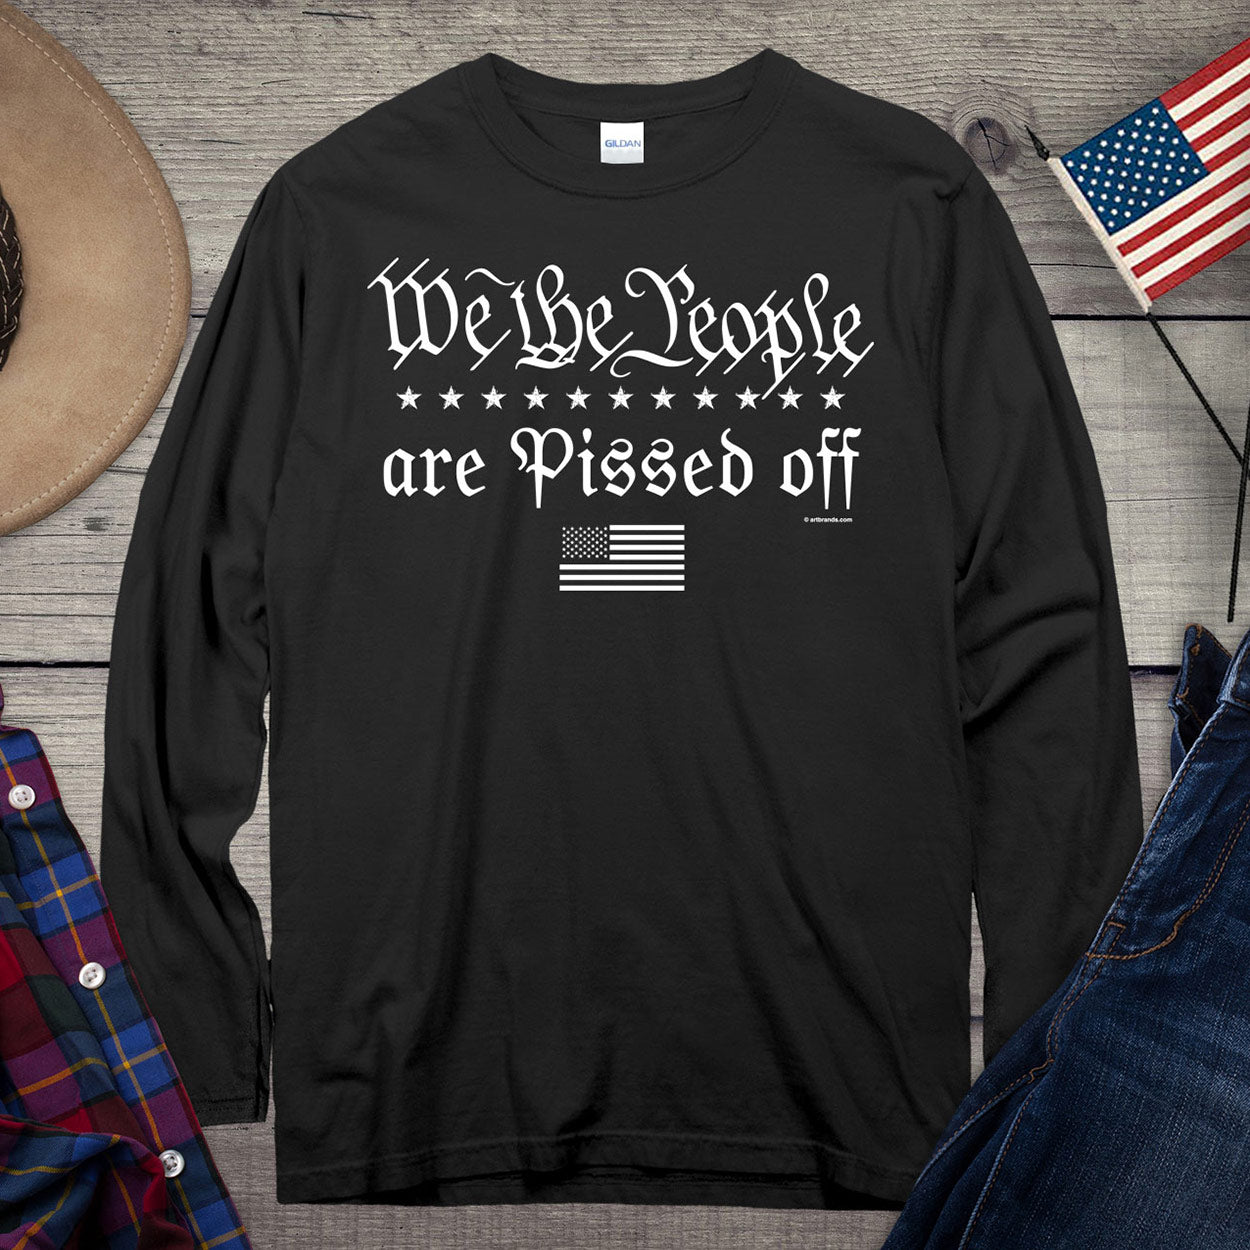 Pissed Off Stars T-shirt, Political Long Sleeve Tee